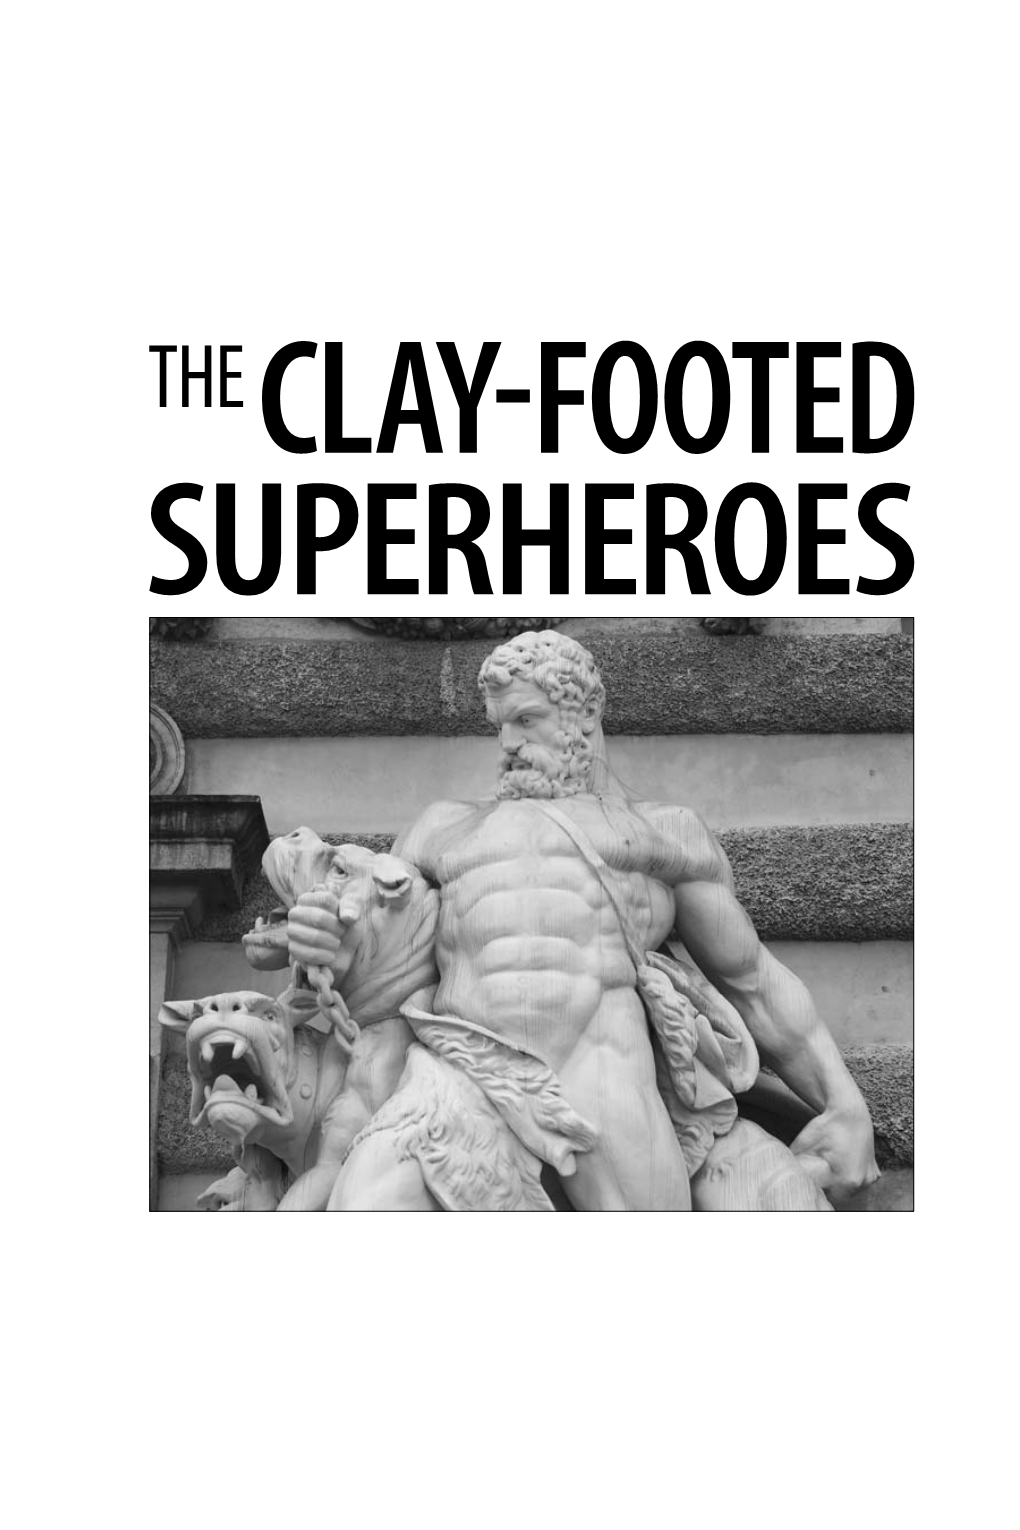 Clay-Footed Superheroes: Mythology Tales for the New Millennium (2009) from Rome to Reformation: Early European History for the New Millennium (2009)